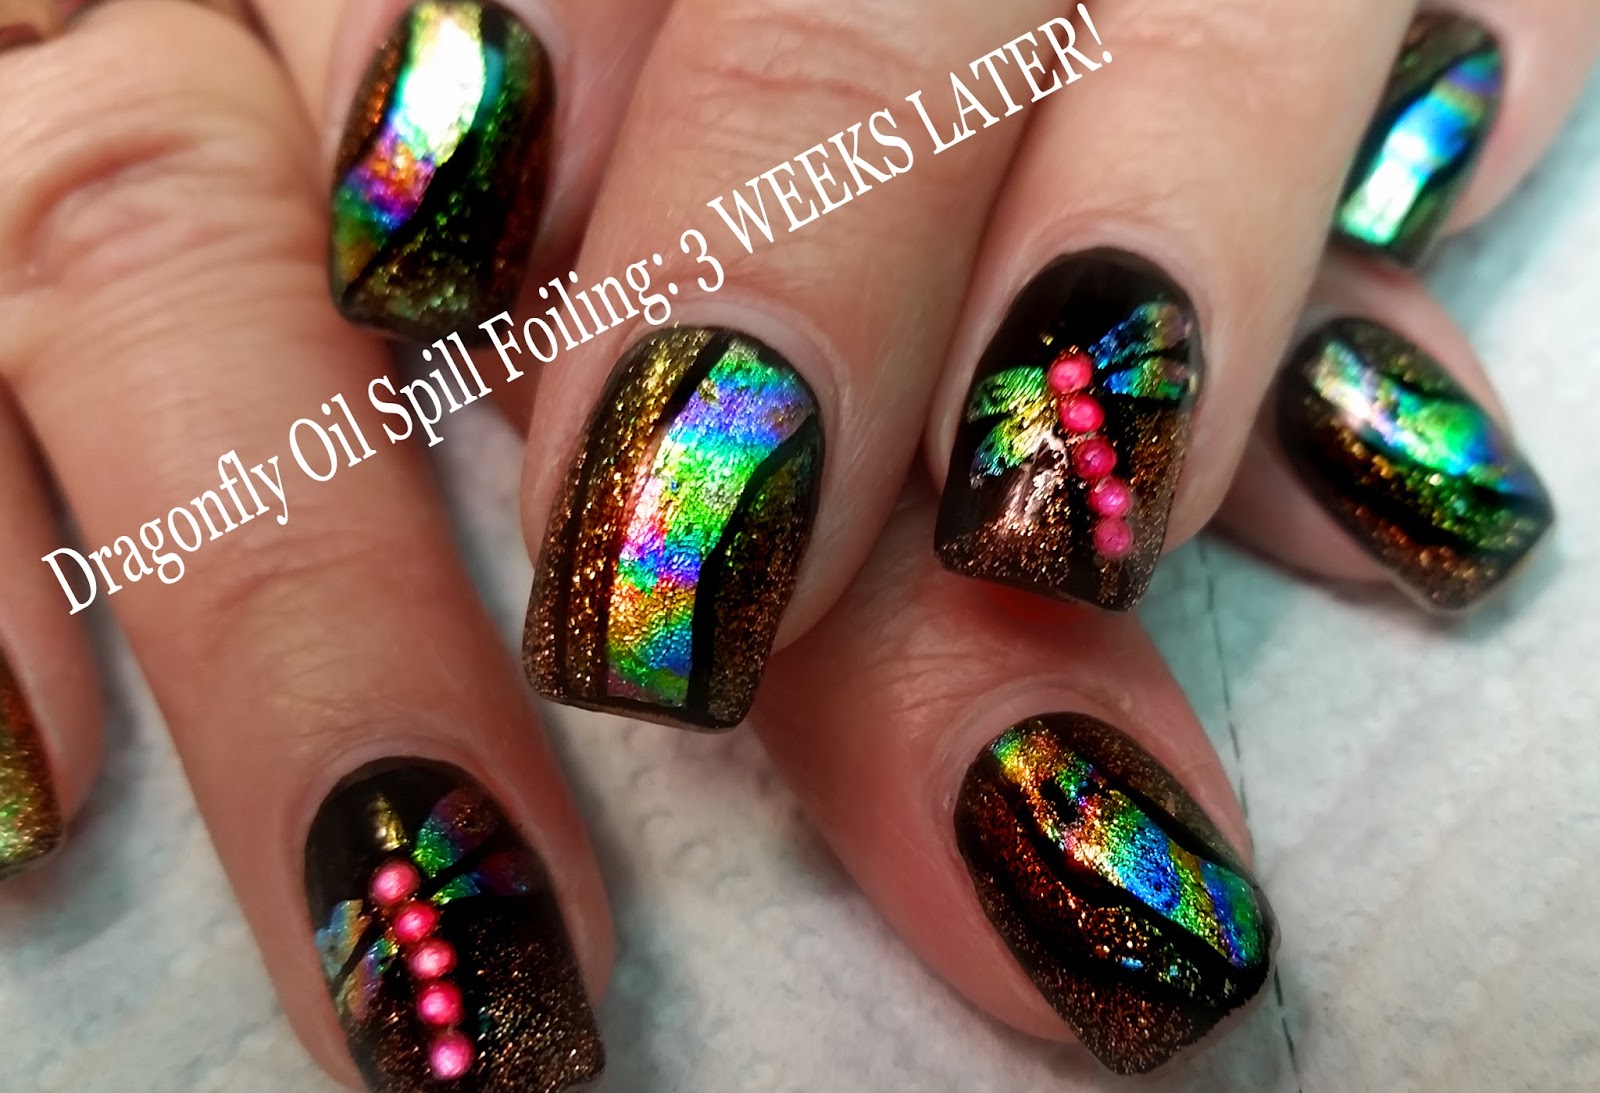 8. How to Remove Oil Slick Nail Art Without Damaging Your Nails - wide 8